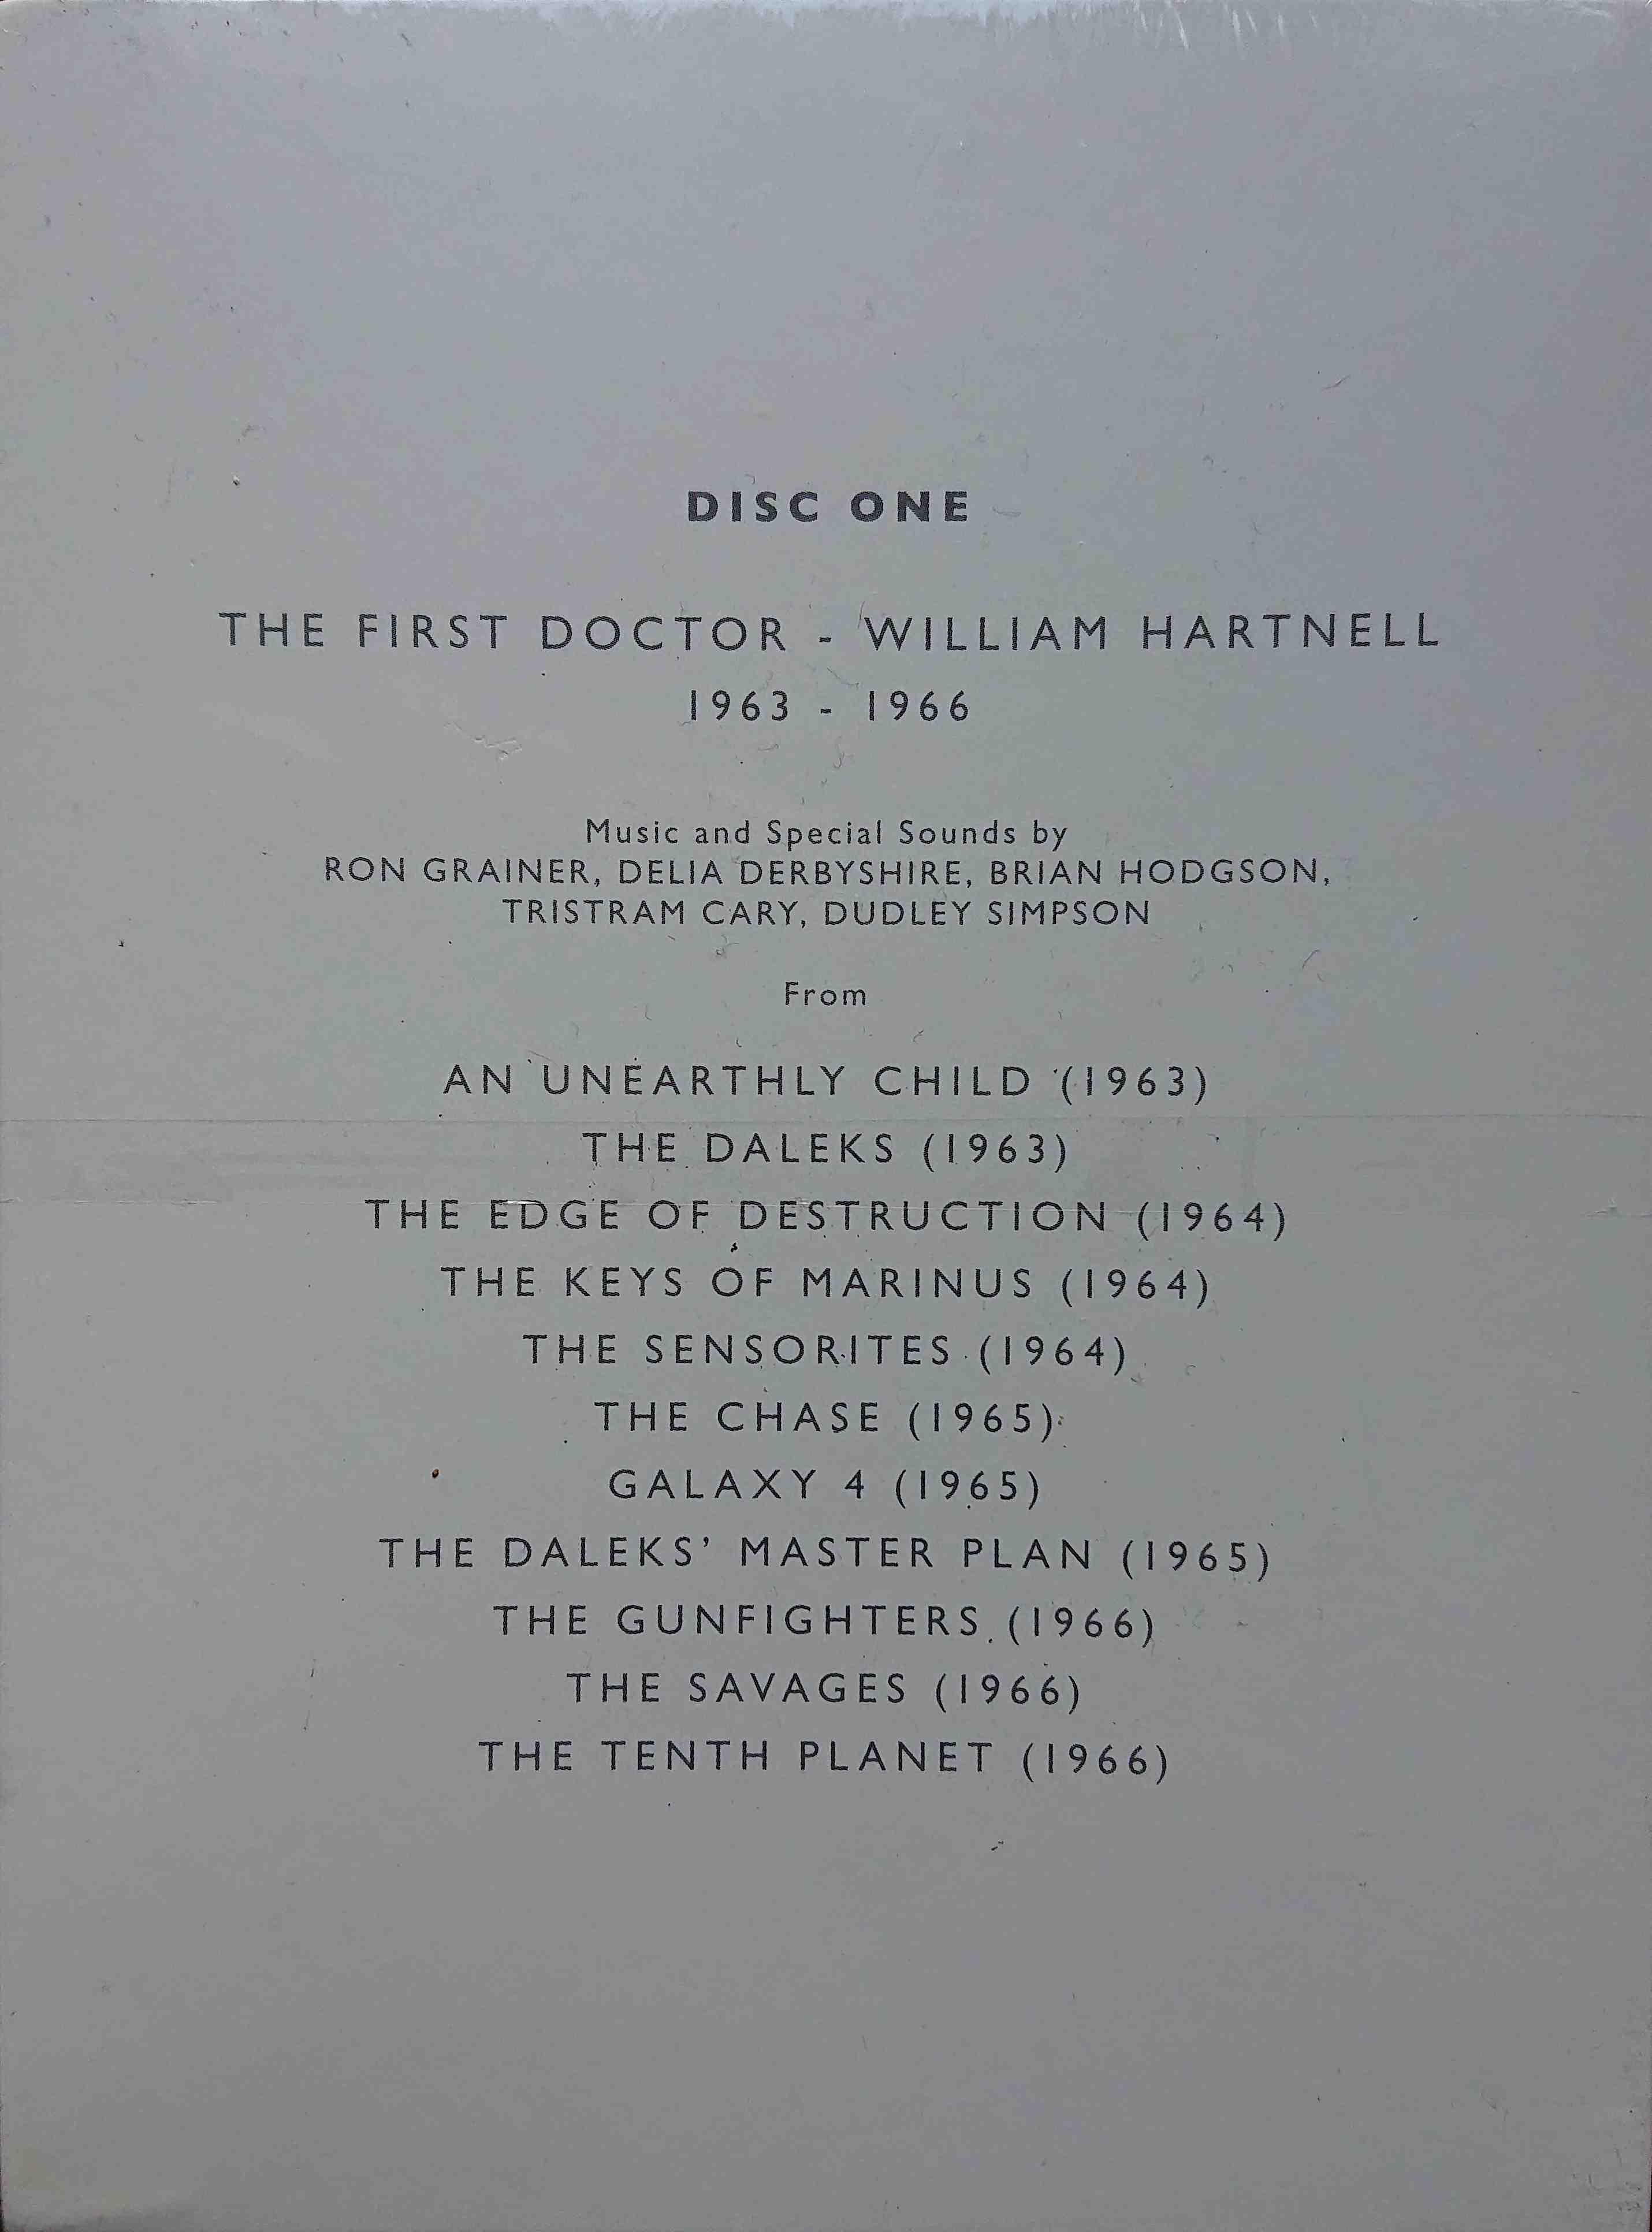 Picture of WHO 50 Doctor Who - The 50th anniversary collection 1963-2013 by artist Various from the BBC records and Tapes library